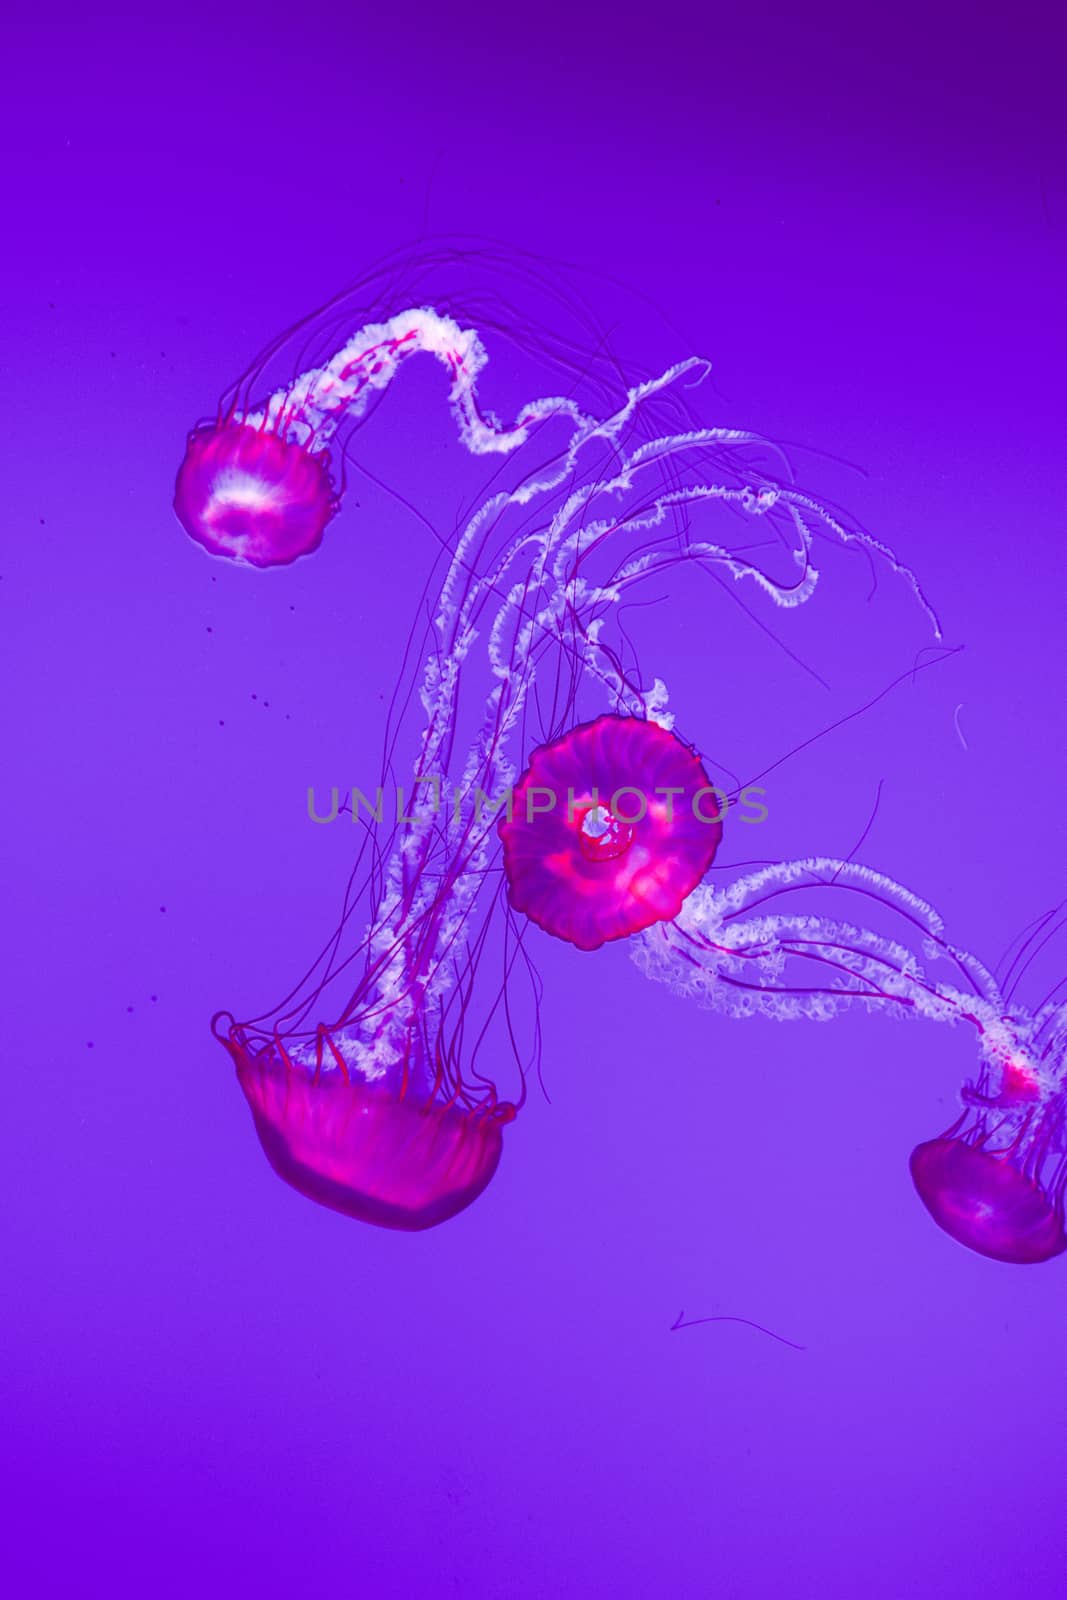 Four Pacific sea nettles by teo